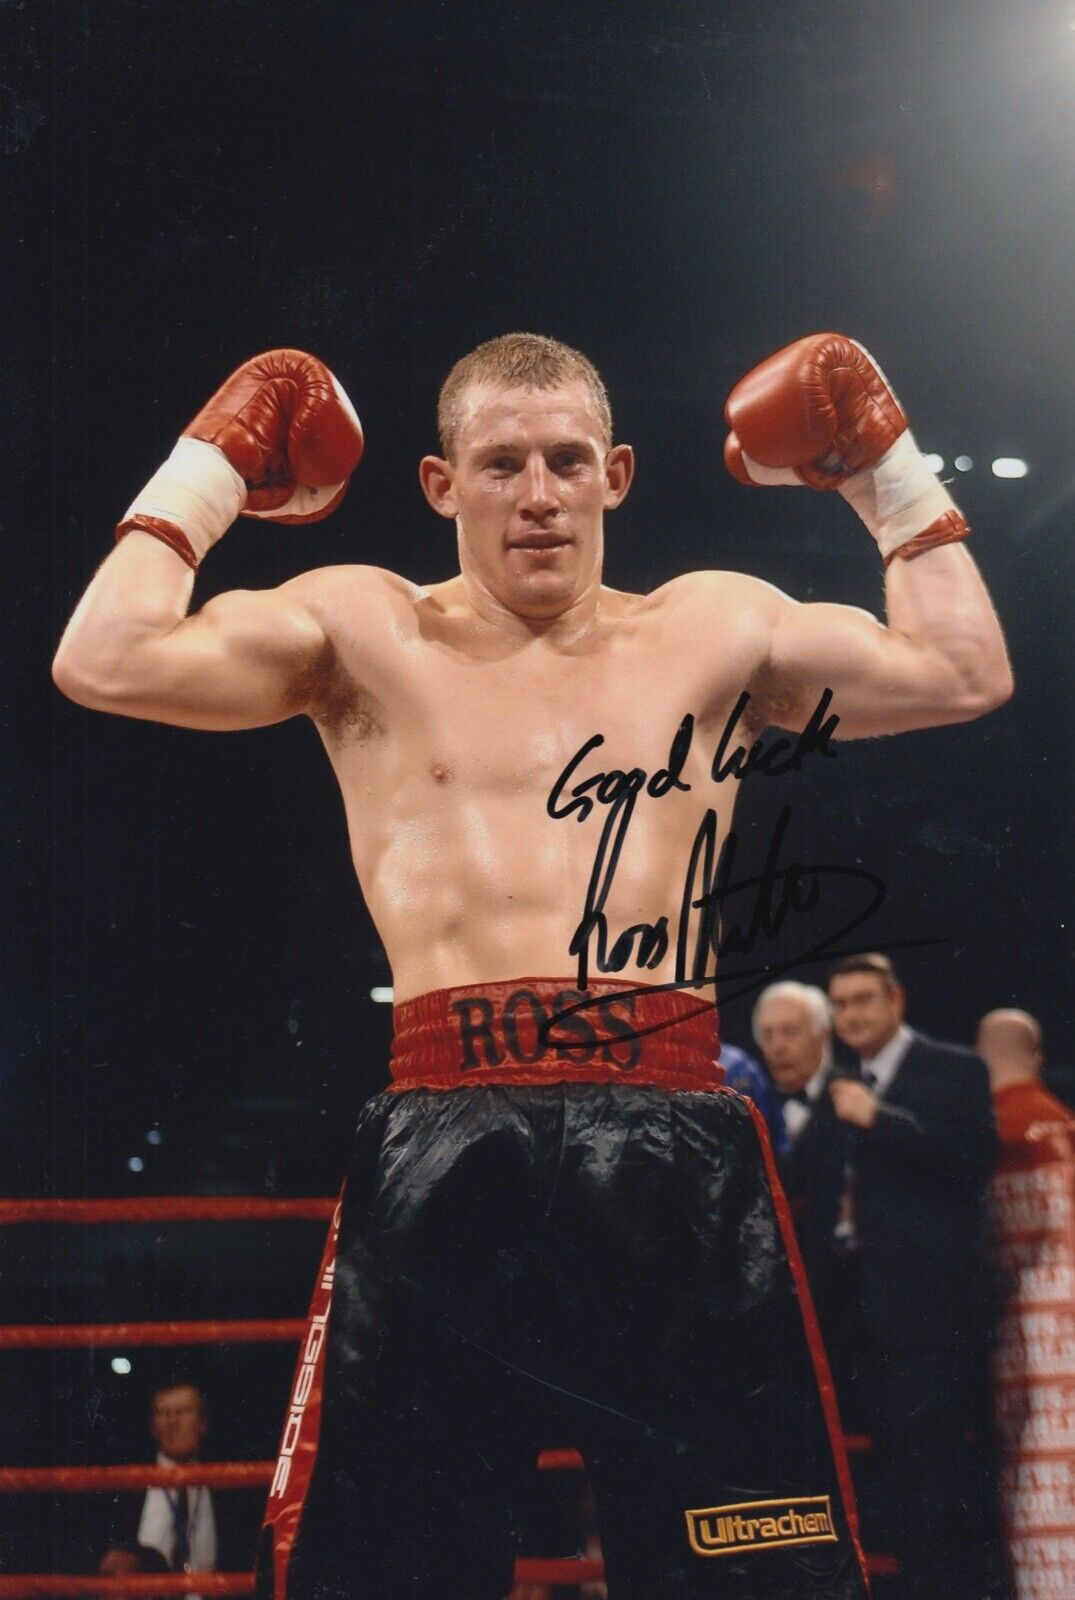 Ross Minter Hand Signed 12x8 Photo Poster painting - Boxing Autograph.